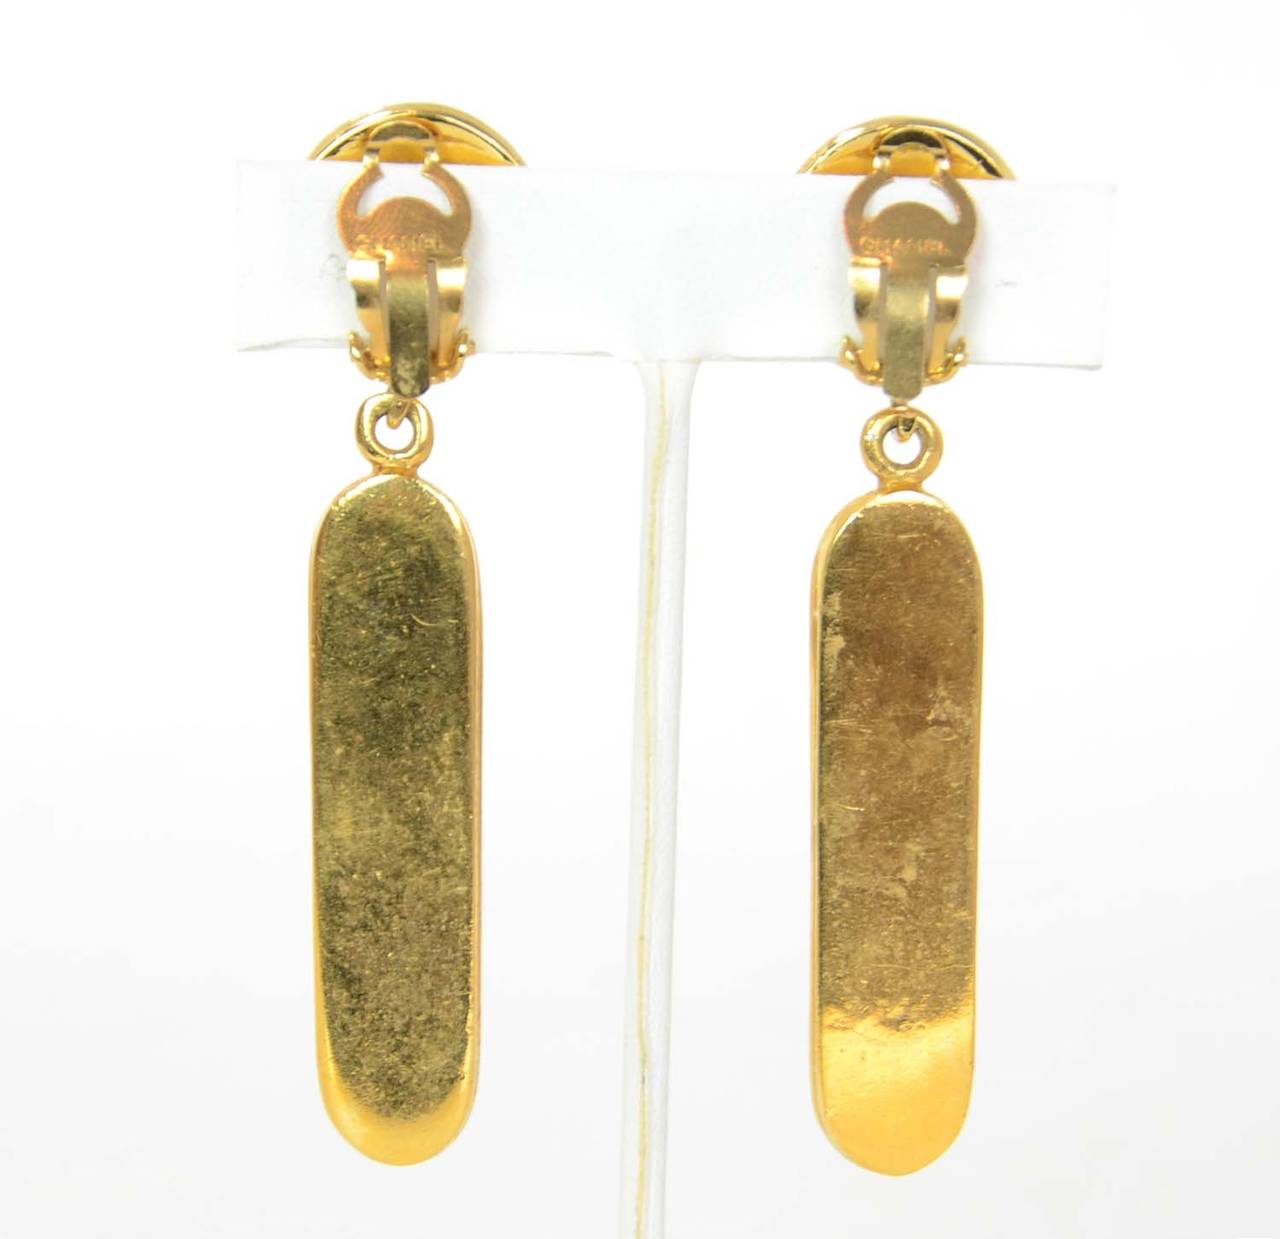 Chanel Gold Thermometer Dangling Earrings

*These are vintage earrings and are being sold AS-IS*

Made in: France
Year of Production: 1960s
Stamp: CHANEL
Closure: Clip-On
Color: Gold
Materials: Metal
Overall Condition: One of the